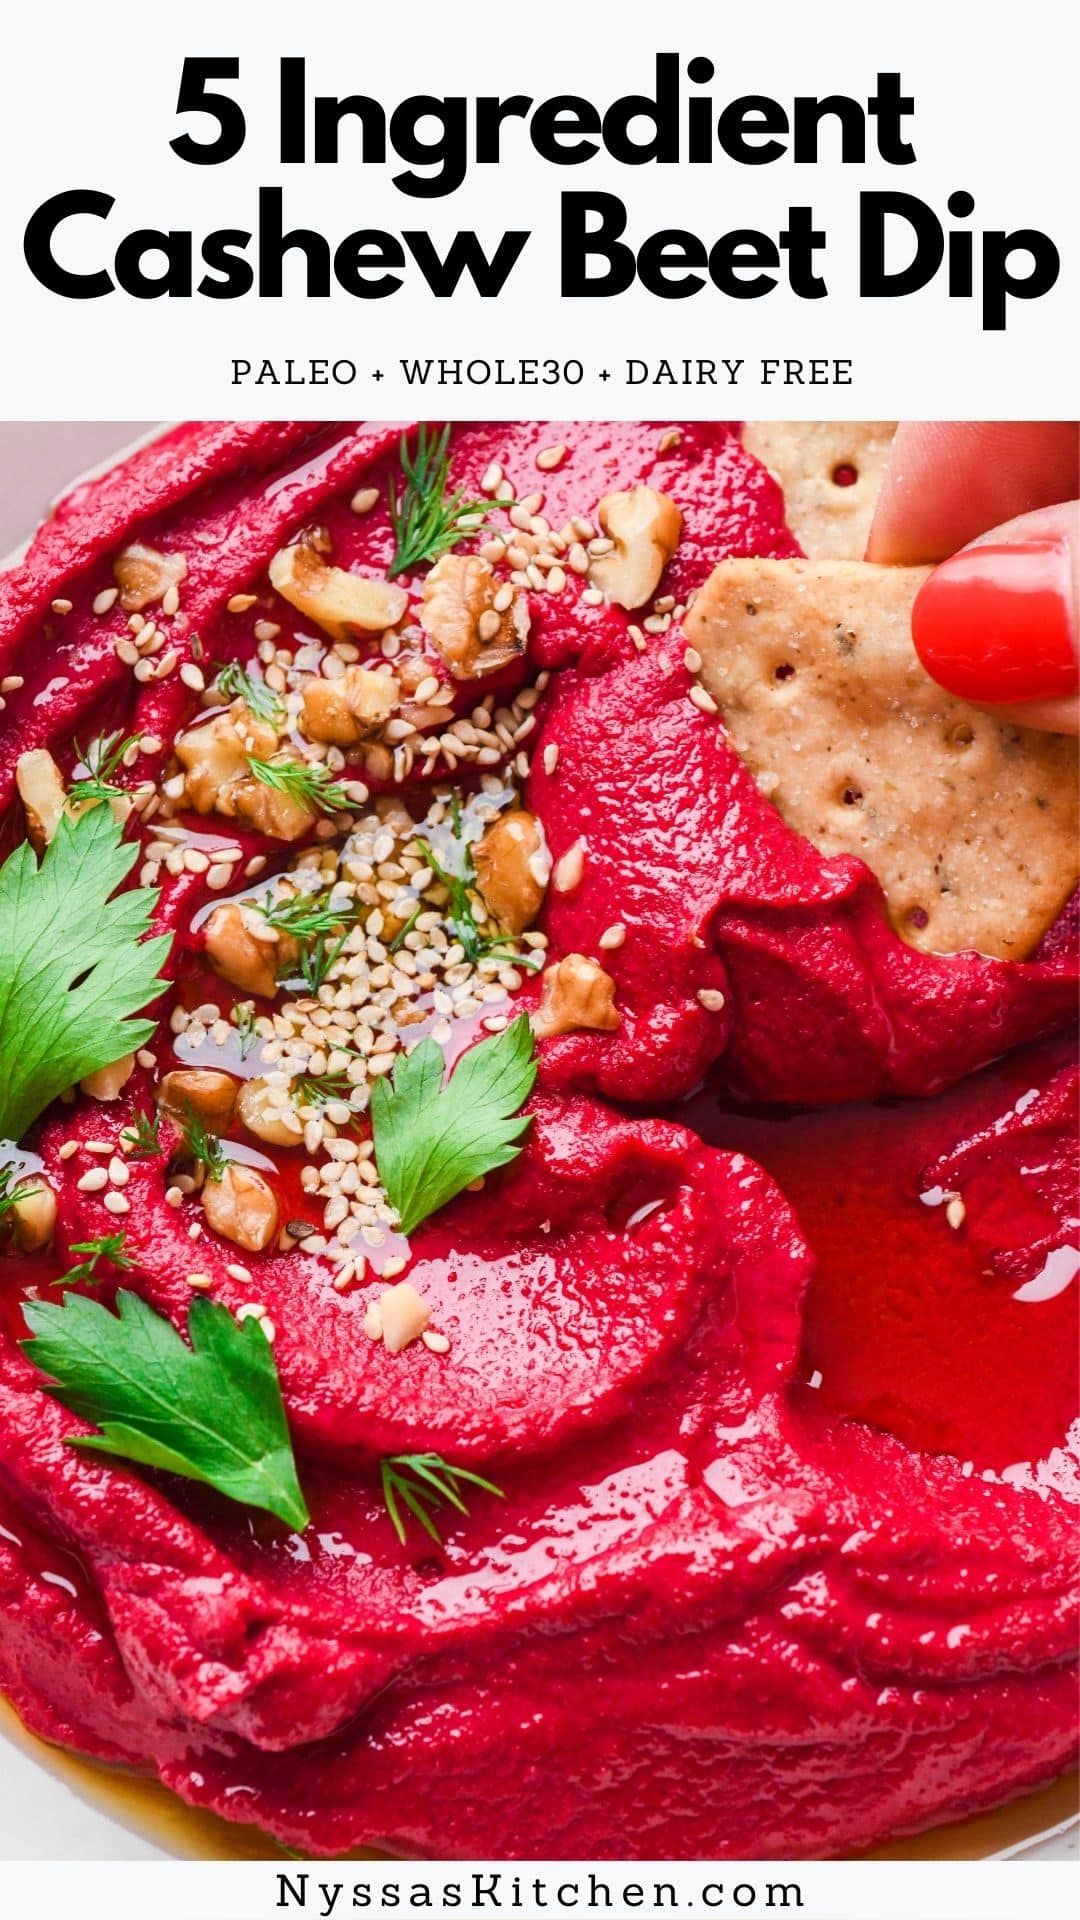 This 5 ingredient cashew beet dip is here to rock your snack loving world in the most delicious way. Besides being such a pretty shade of pink it's also full of good for you ingredients like beets, cashews, garlic, red wine vinegar and salt. THAT'S IT! Super easy and very tasty. Paleo, vegan, whole30, dairy free, and gluten free.